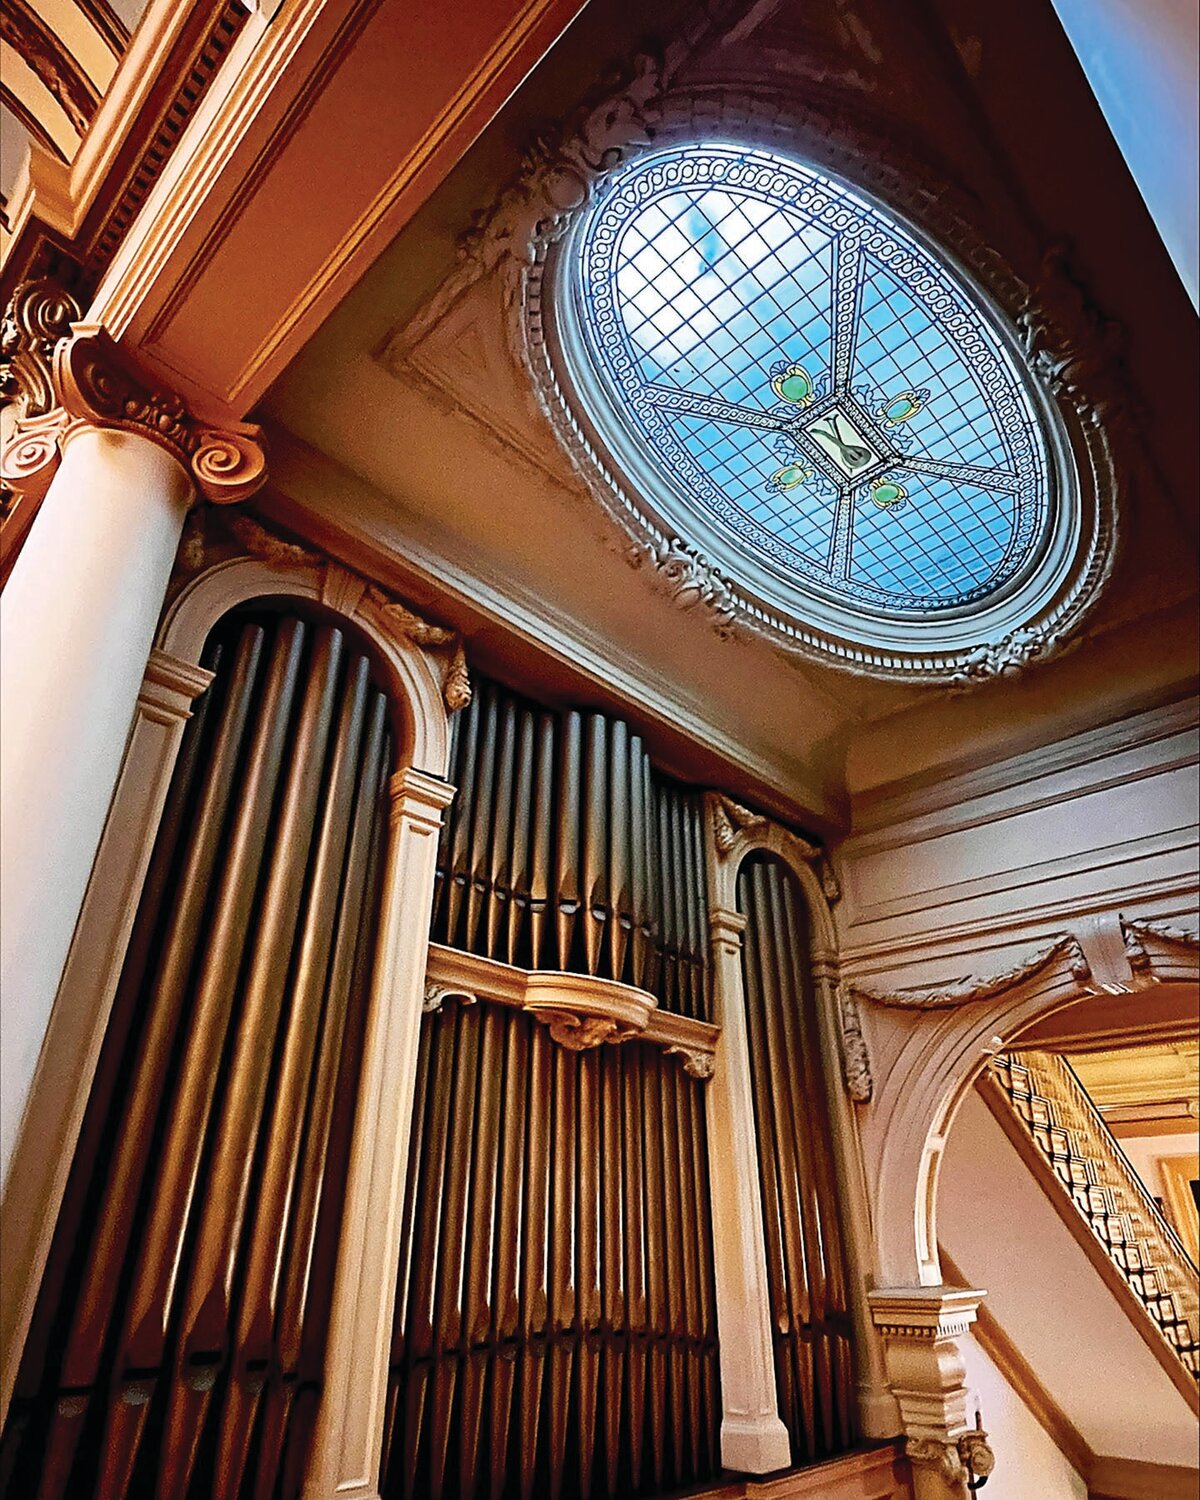 Glen Foerd’s 121-year-old pipe organ was recently restored. On Jan. 6, Mark Loria, principal organist for the Cathedral Basilica of Saints Peter & Paul, will perform a free live concert to mark the occasion.